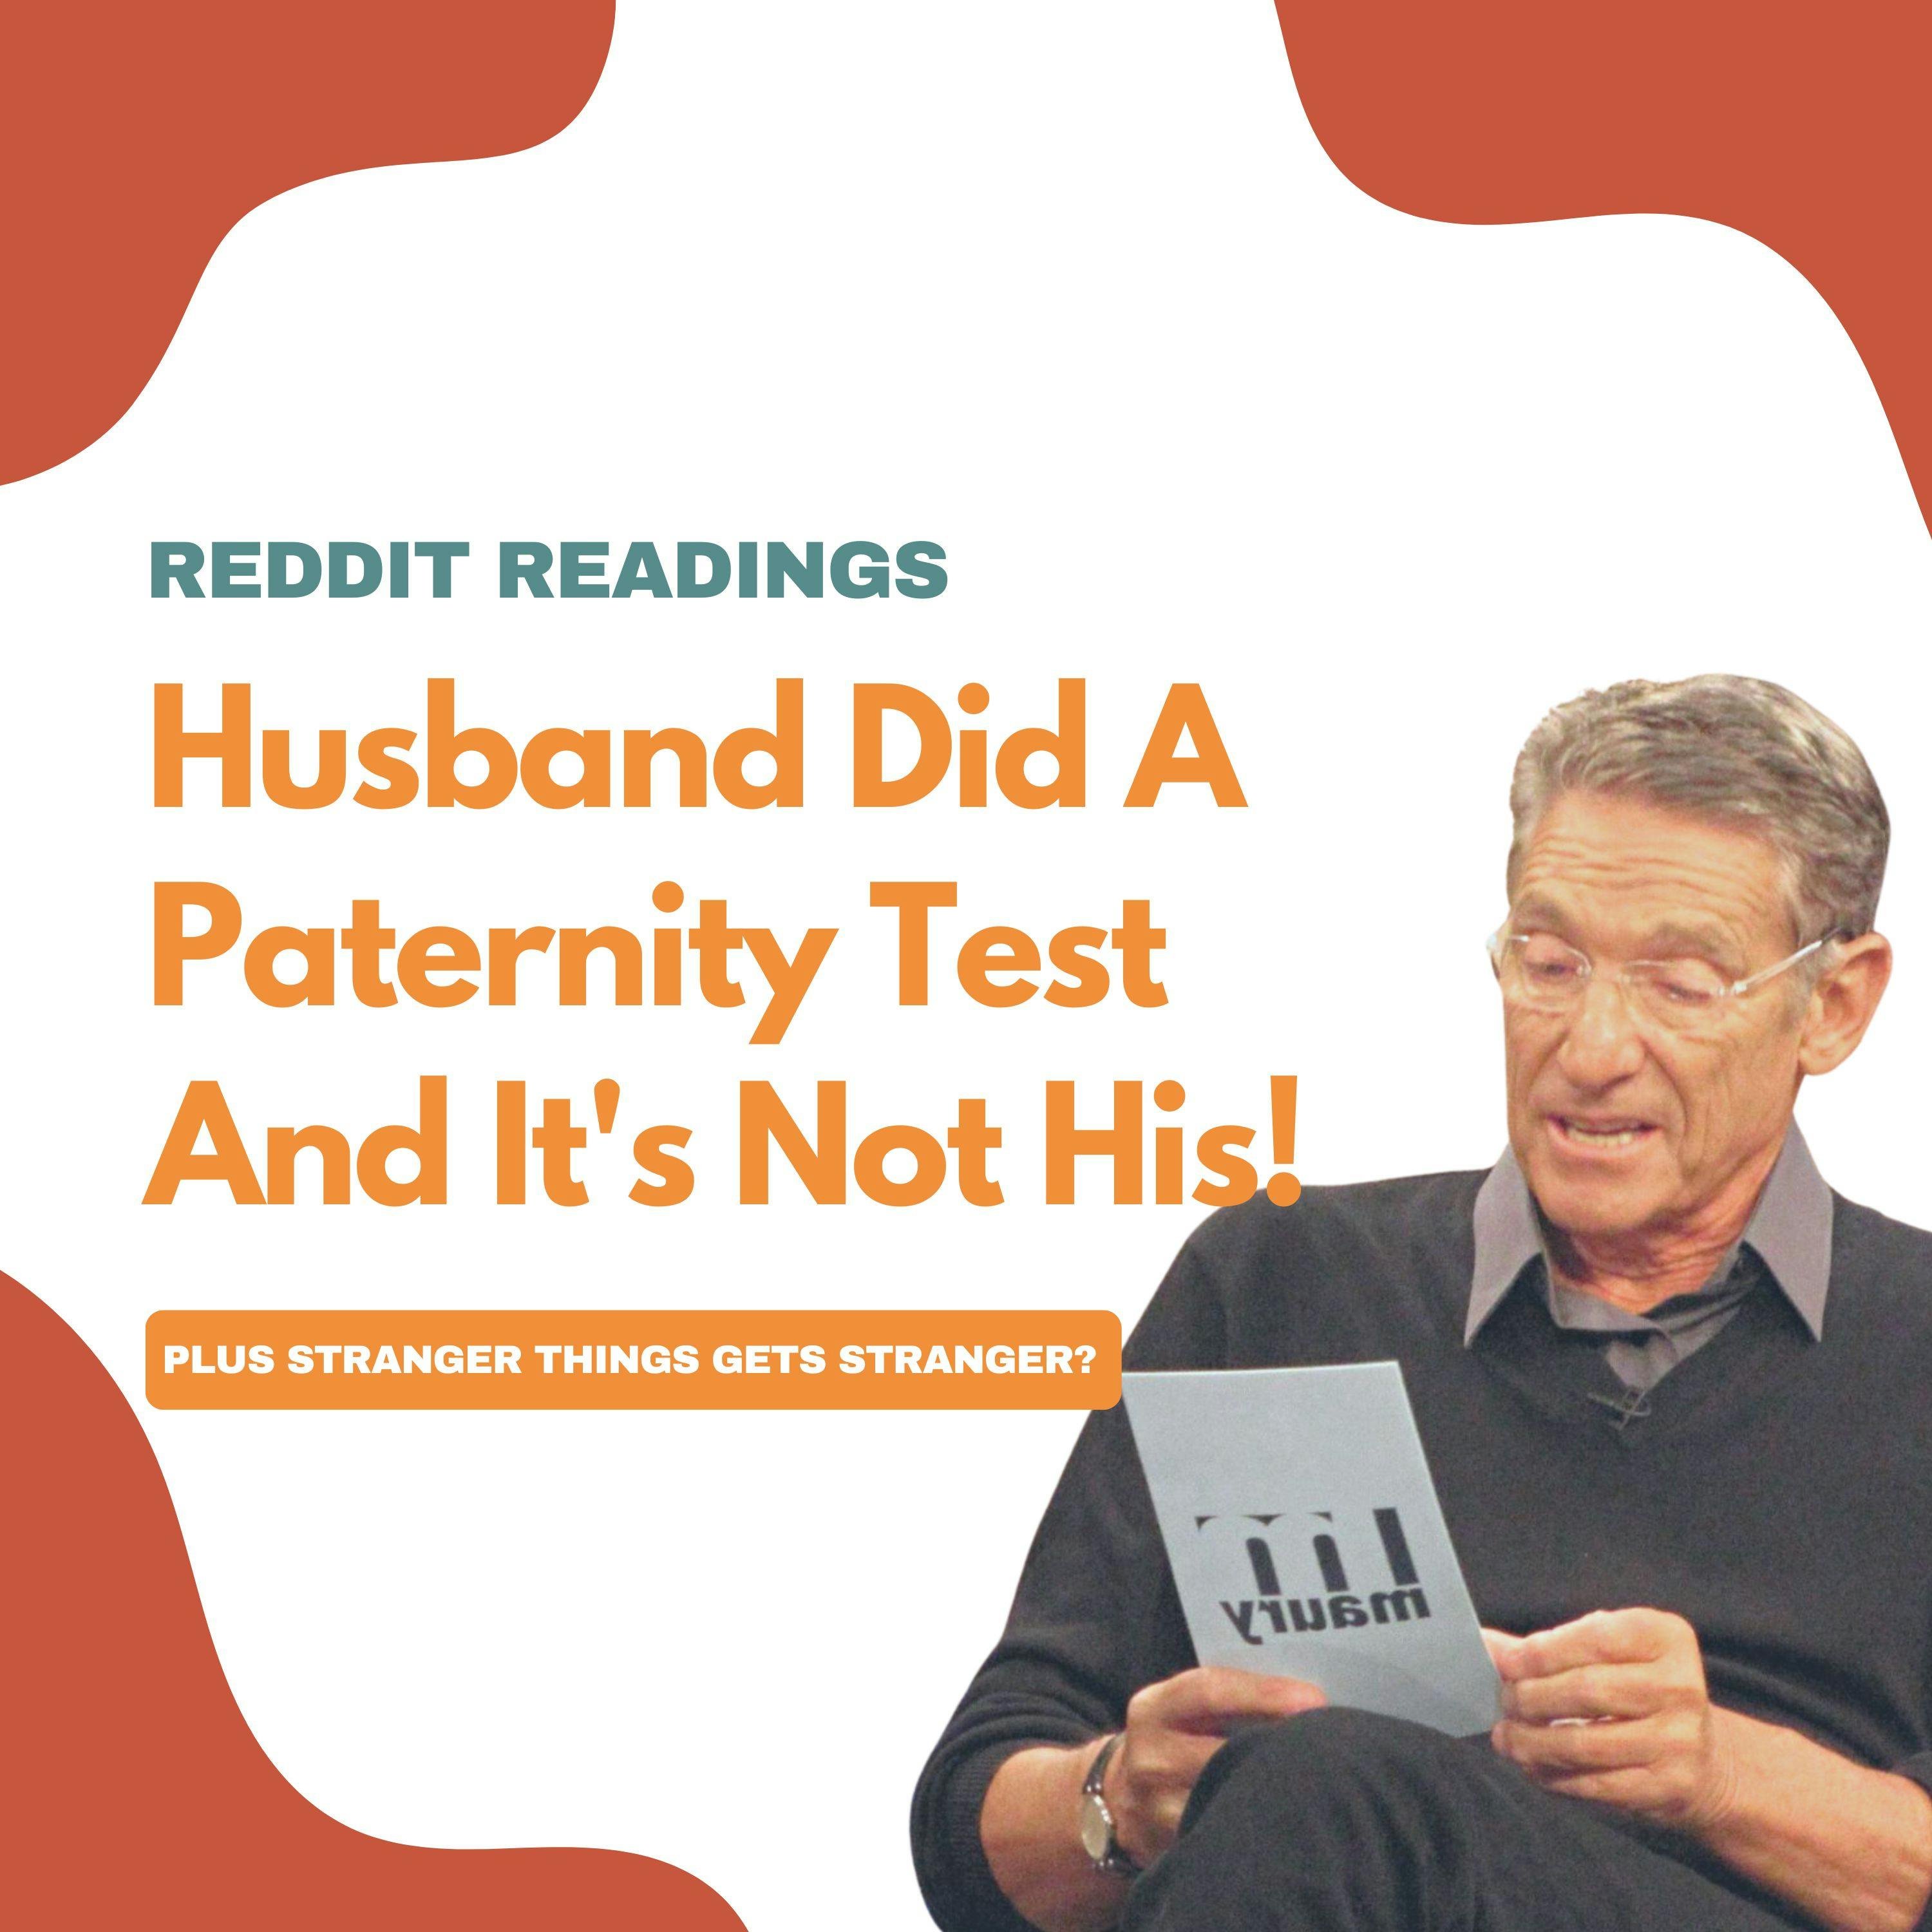 #81: Reddit Readings | Husband Did A Paternity Test And It's Not His!